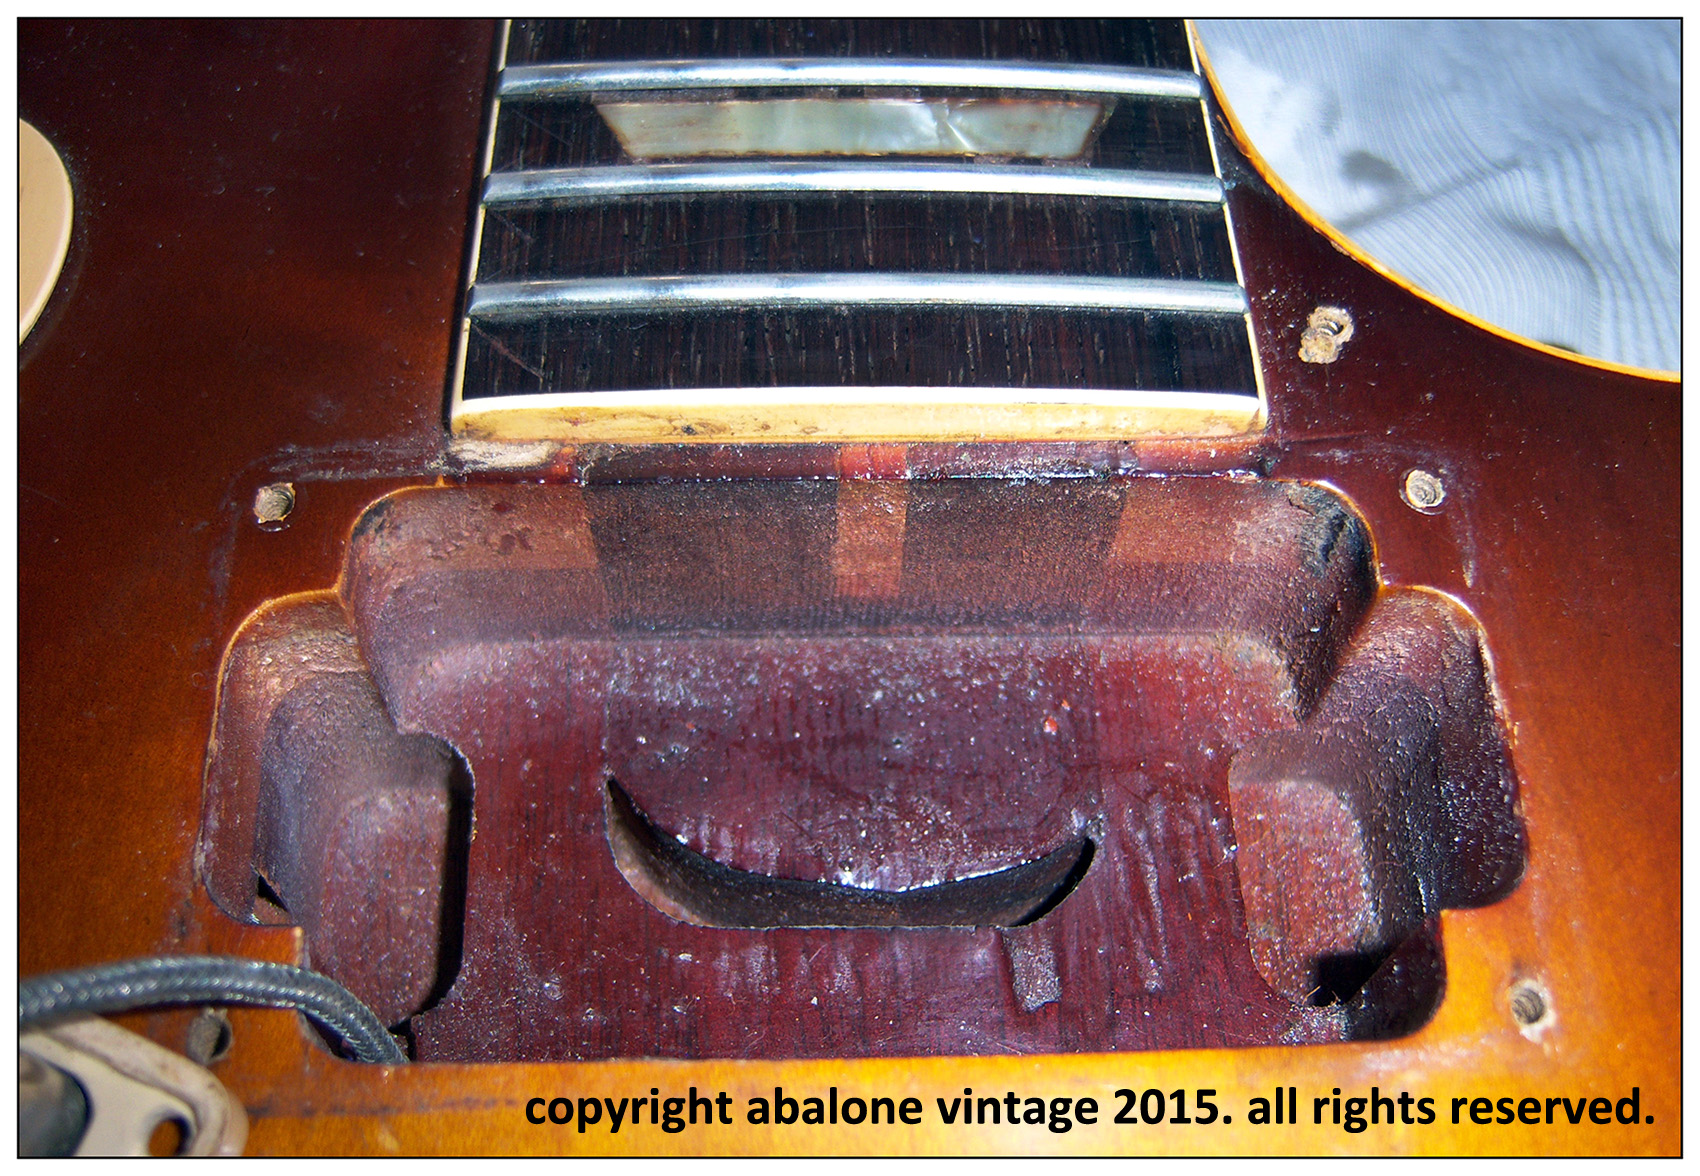 1959 Gibson Les Paul Standard Guitar 9 1259 "Lilley" Burst. Refinished refin PAF parts guitar vintage old repair